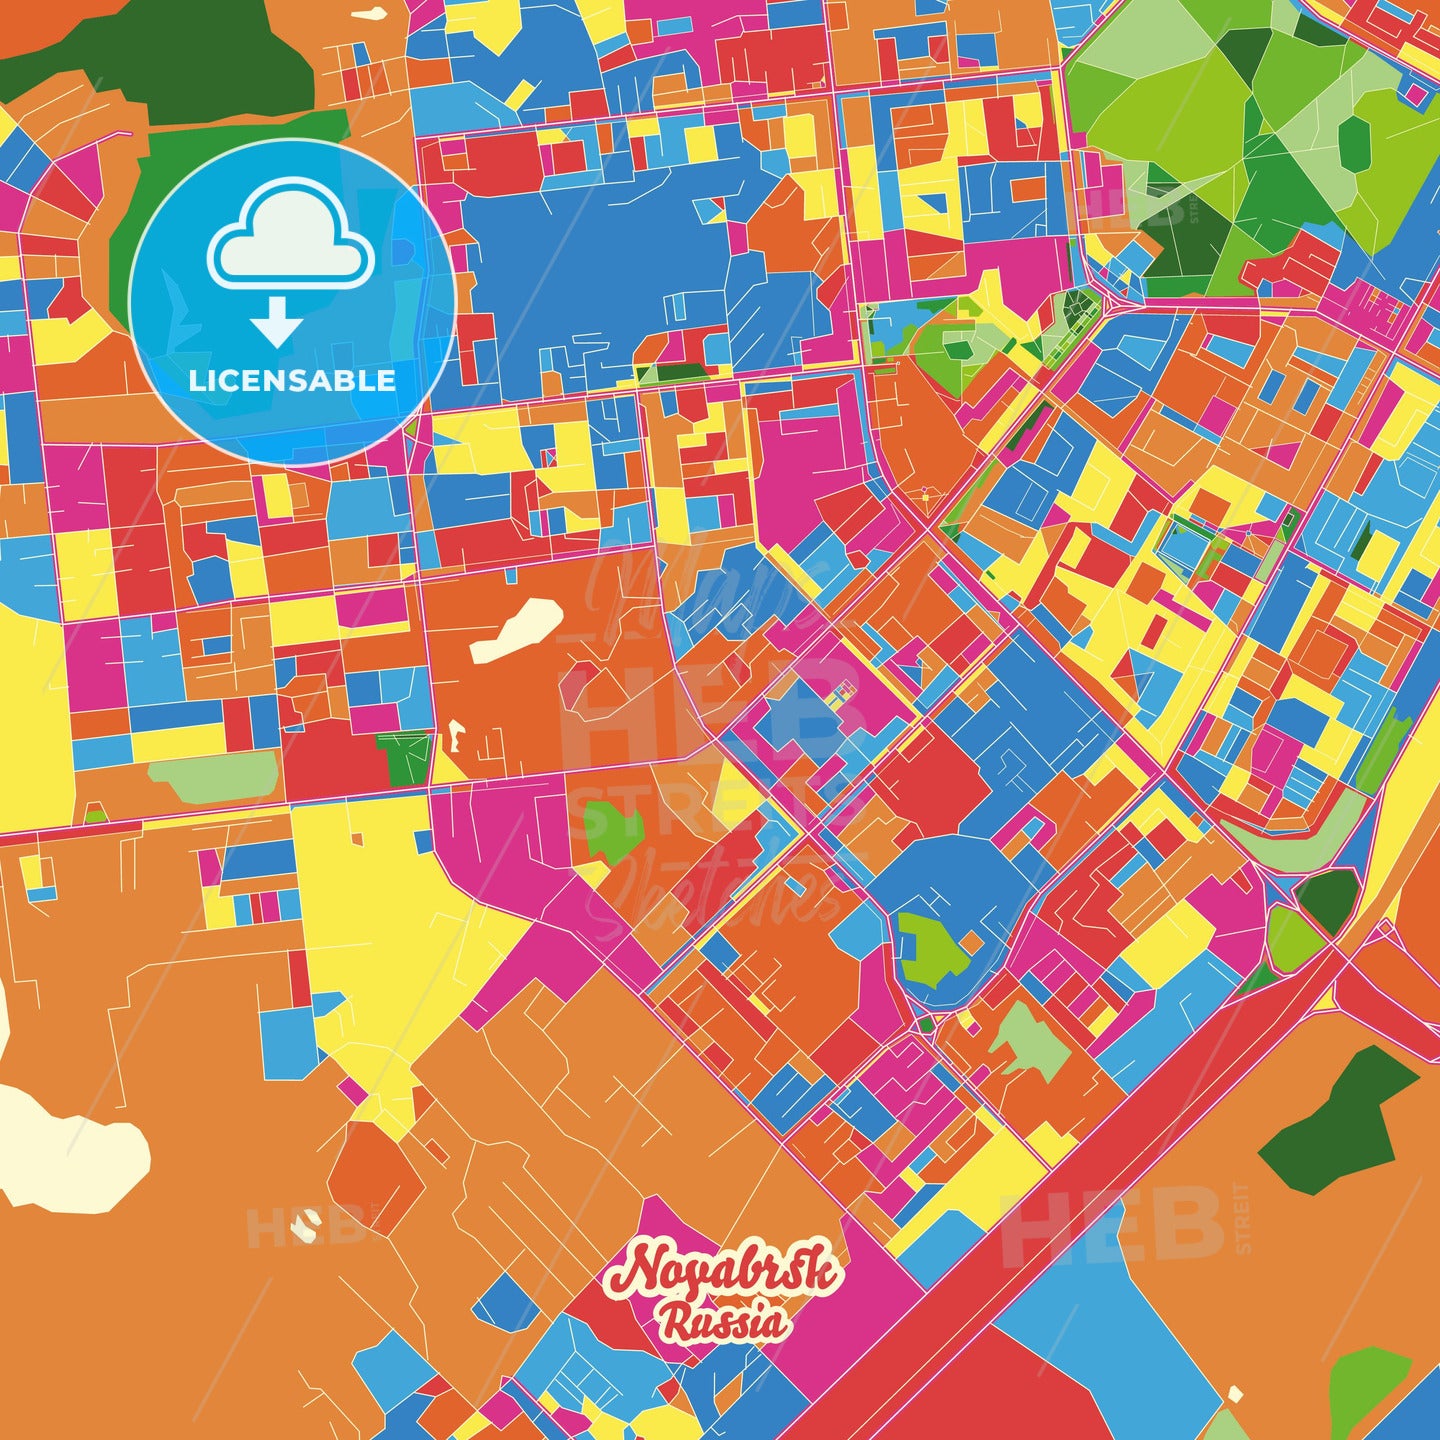 Noyabrsk, Russia Crazy Colorful Street Map Poster Template - HEBSTREITS Sketches